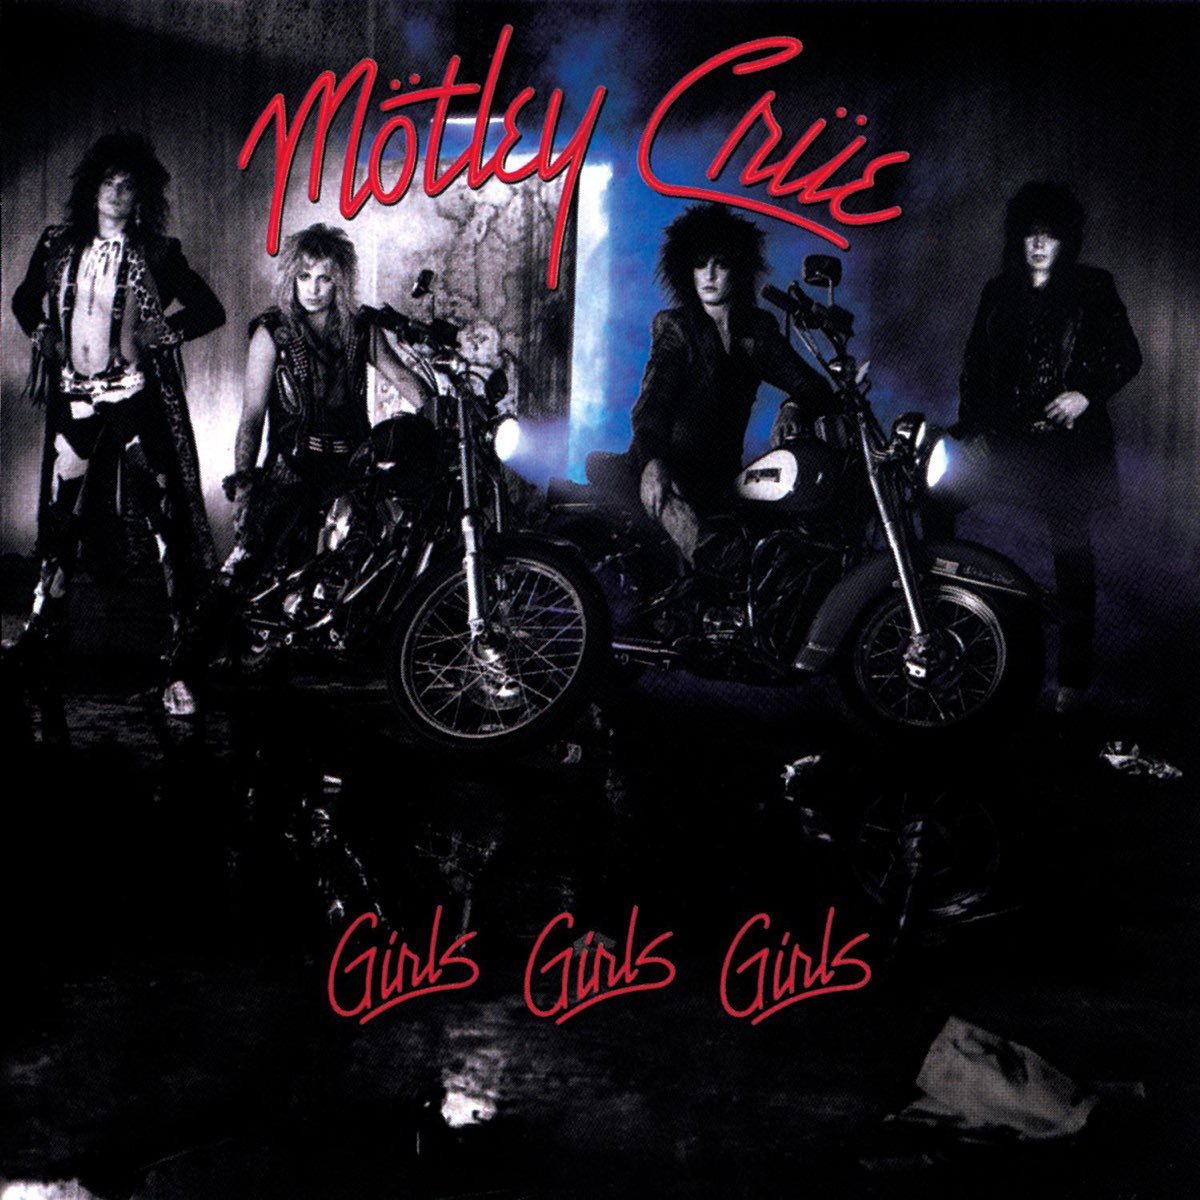 #OnThisDay in 1987, #MotleyCrue released their 4th album 'Girls, Girls, Girls' featuring singles Wildside, You're All I Need and the title track. It was well received by critics and fans, reaching a peak of #2 on the Billboard 200 while going 4x platinum in the US #80sMetal